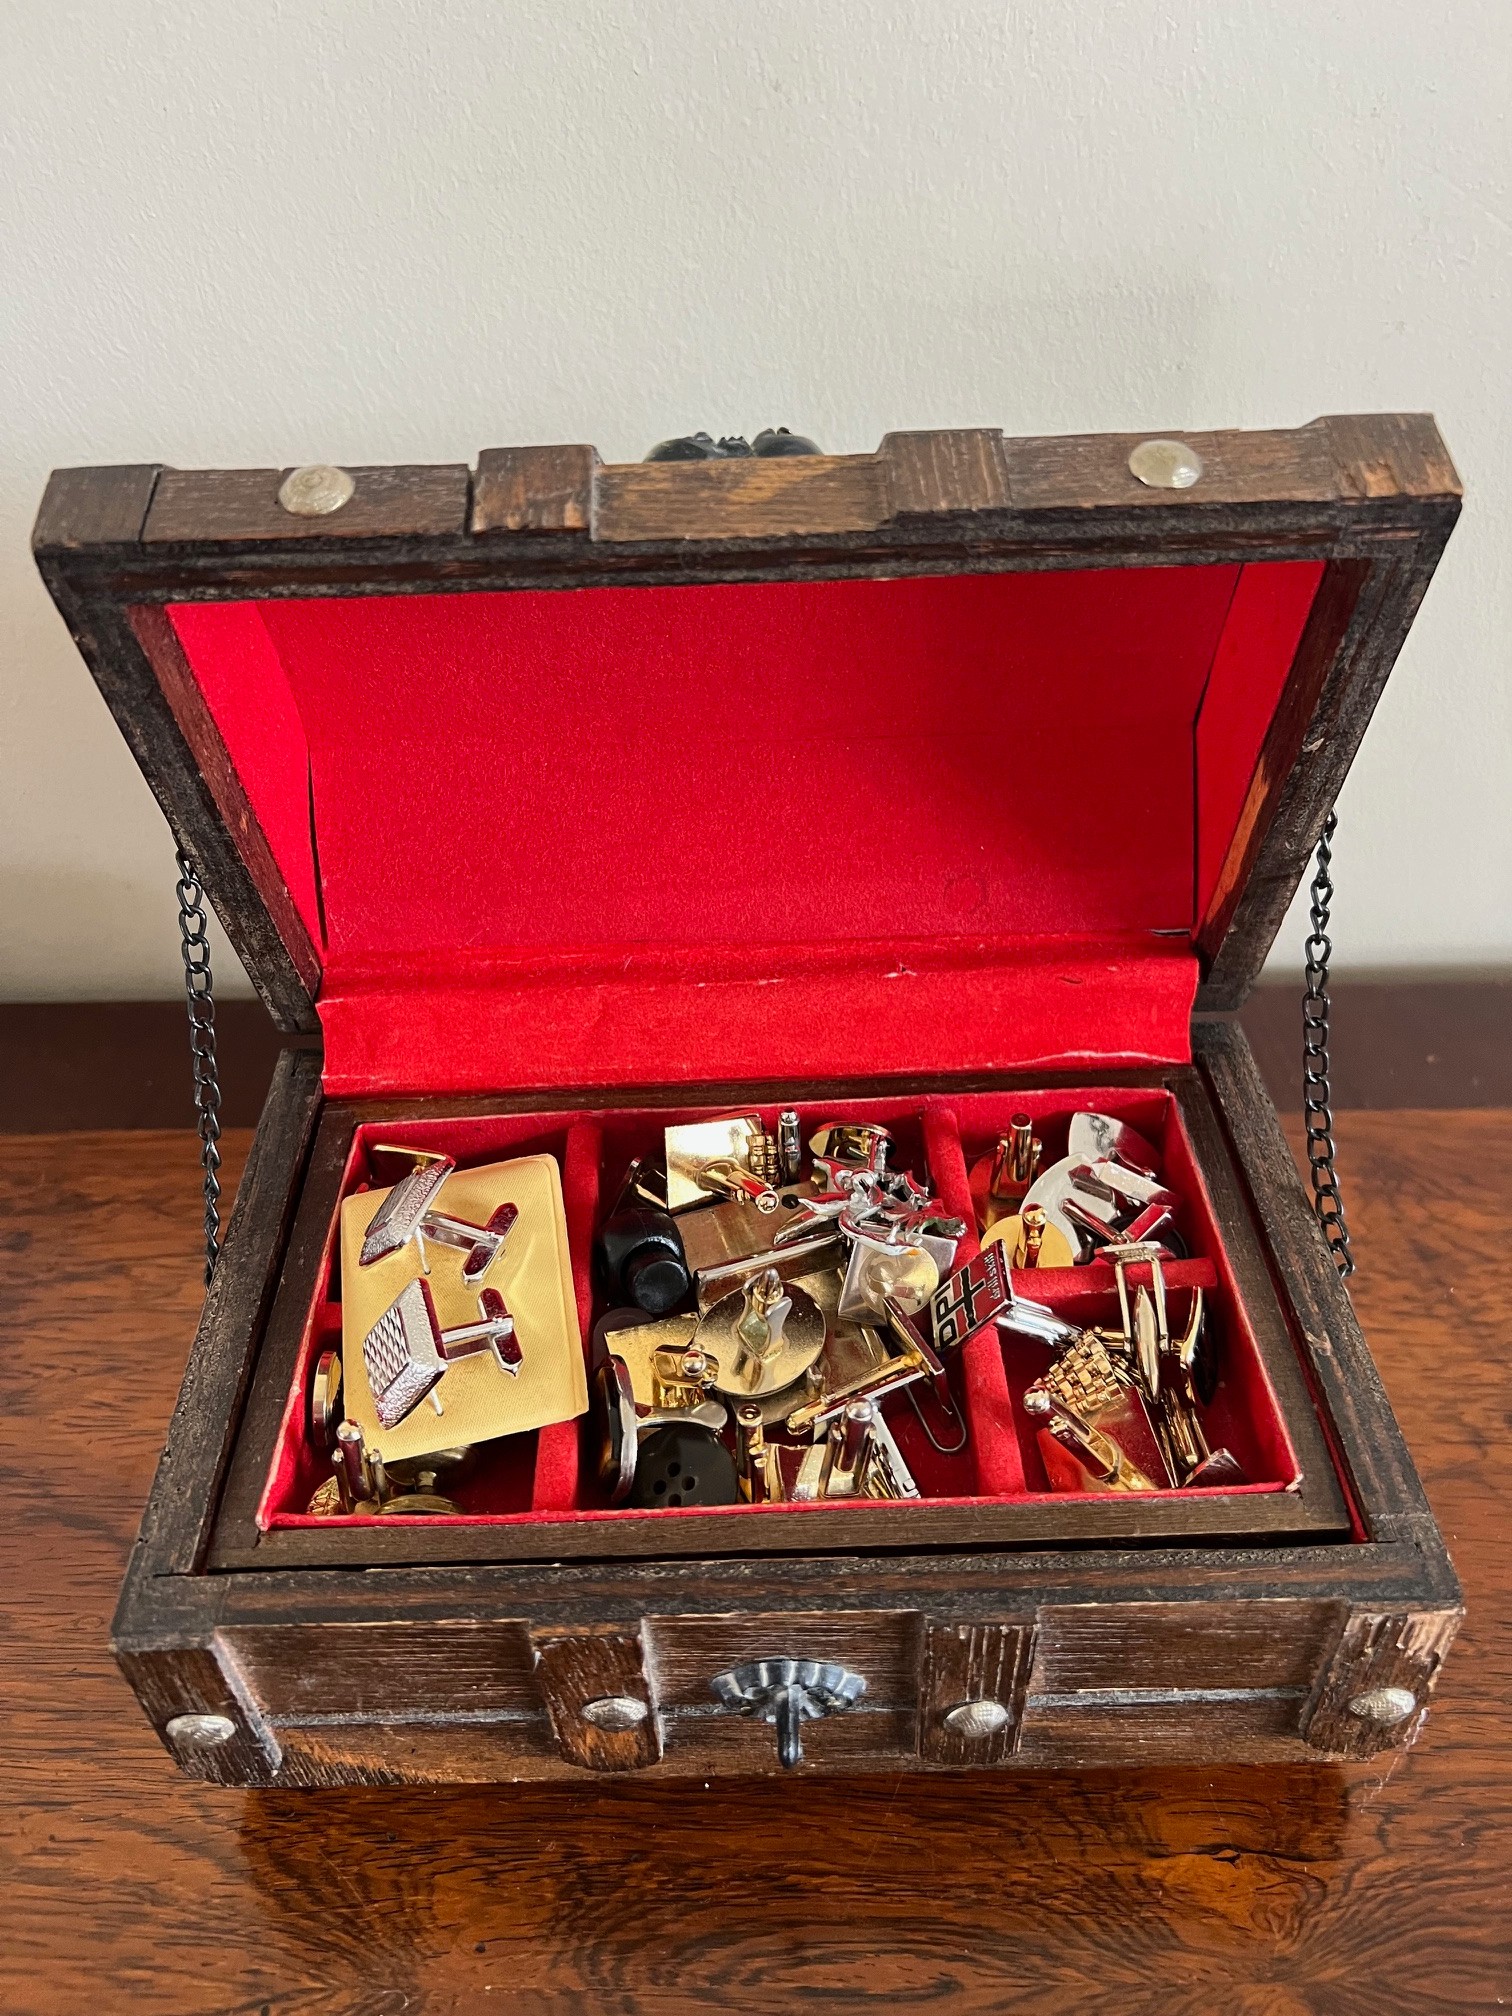 SILVER BRACELET AND QUANTITY OF COSTUME JEWELLERY, PLUS WOODEN CASKET - Image 3 of 4